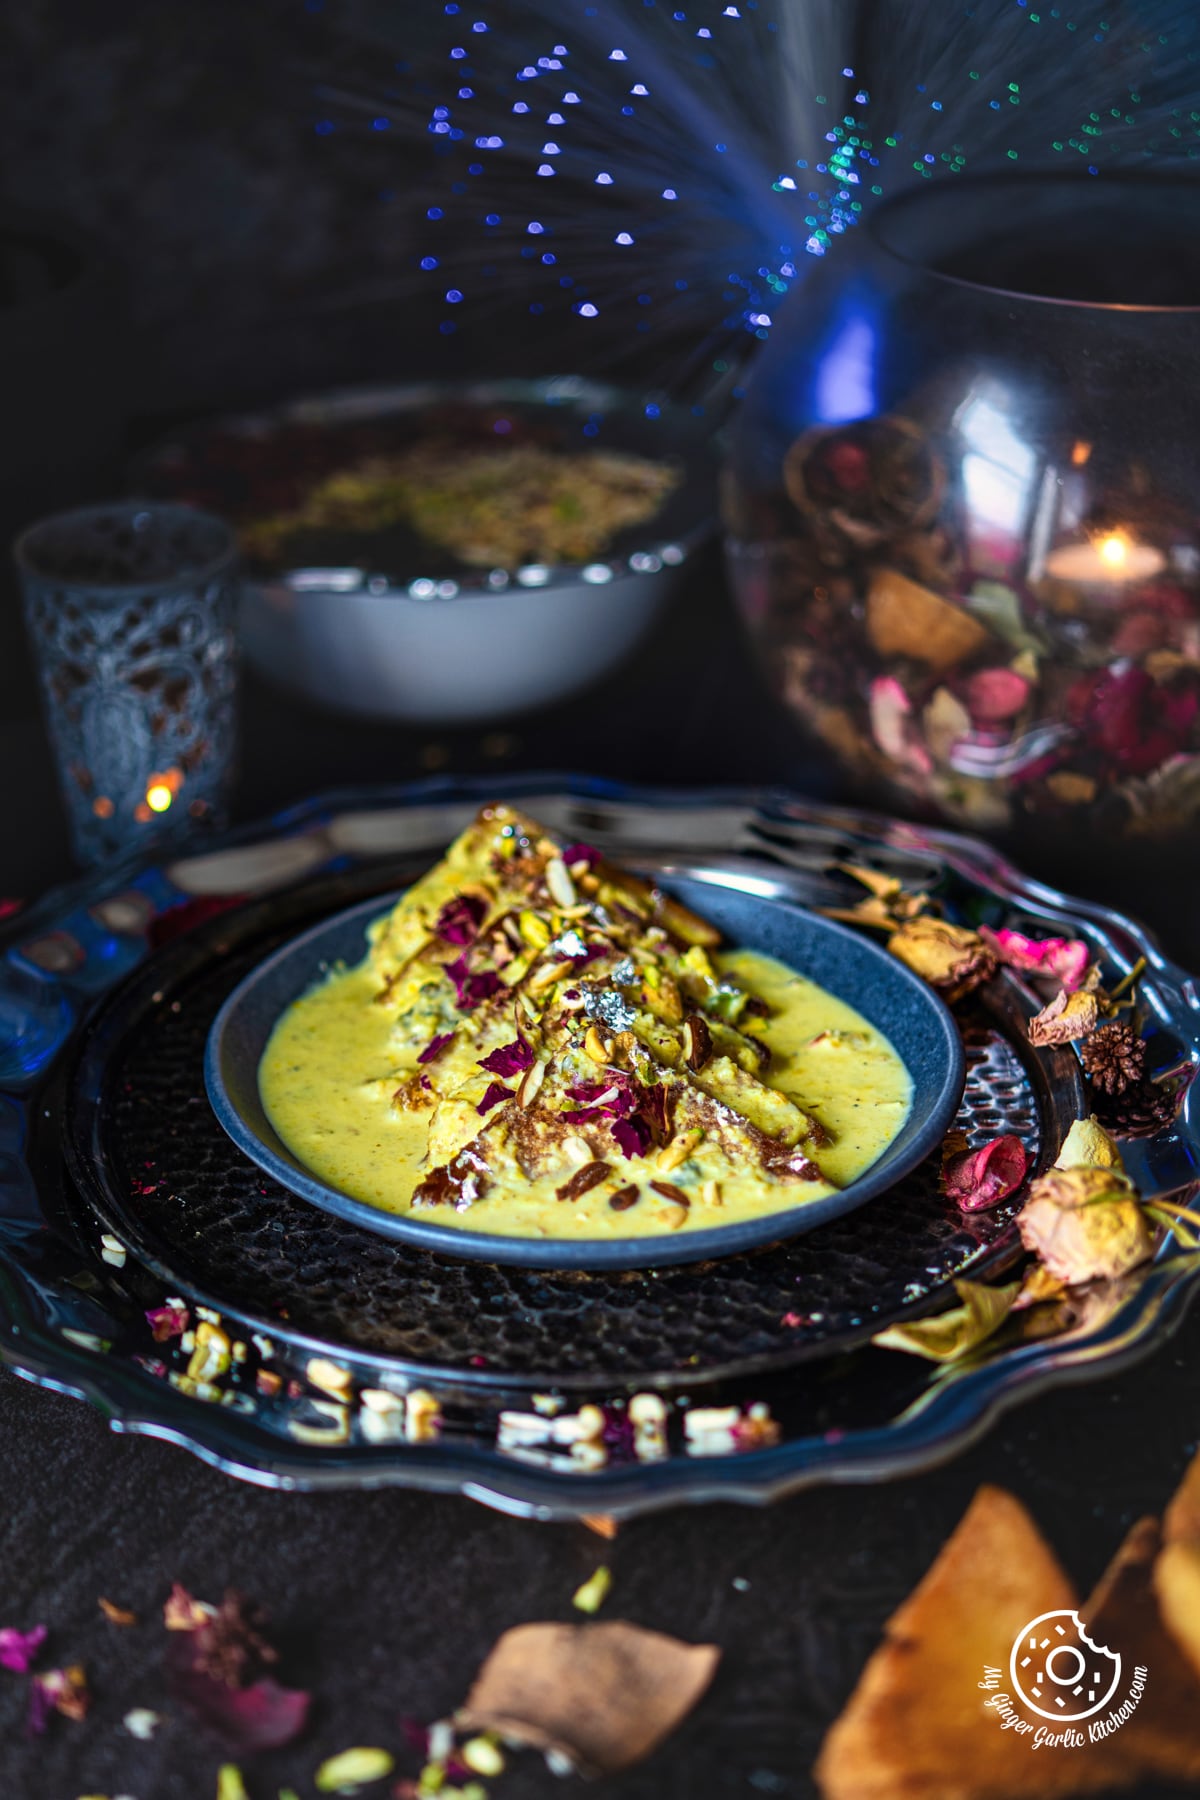 shahi tukda also known as shahi tukra served in a grey ceramic plate with flowers and candle on the side